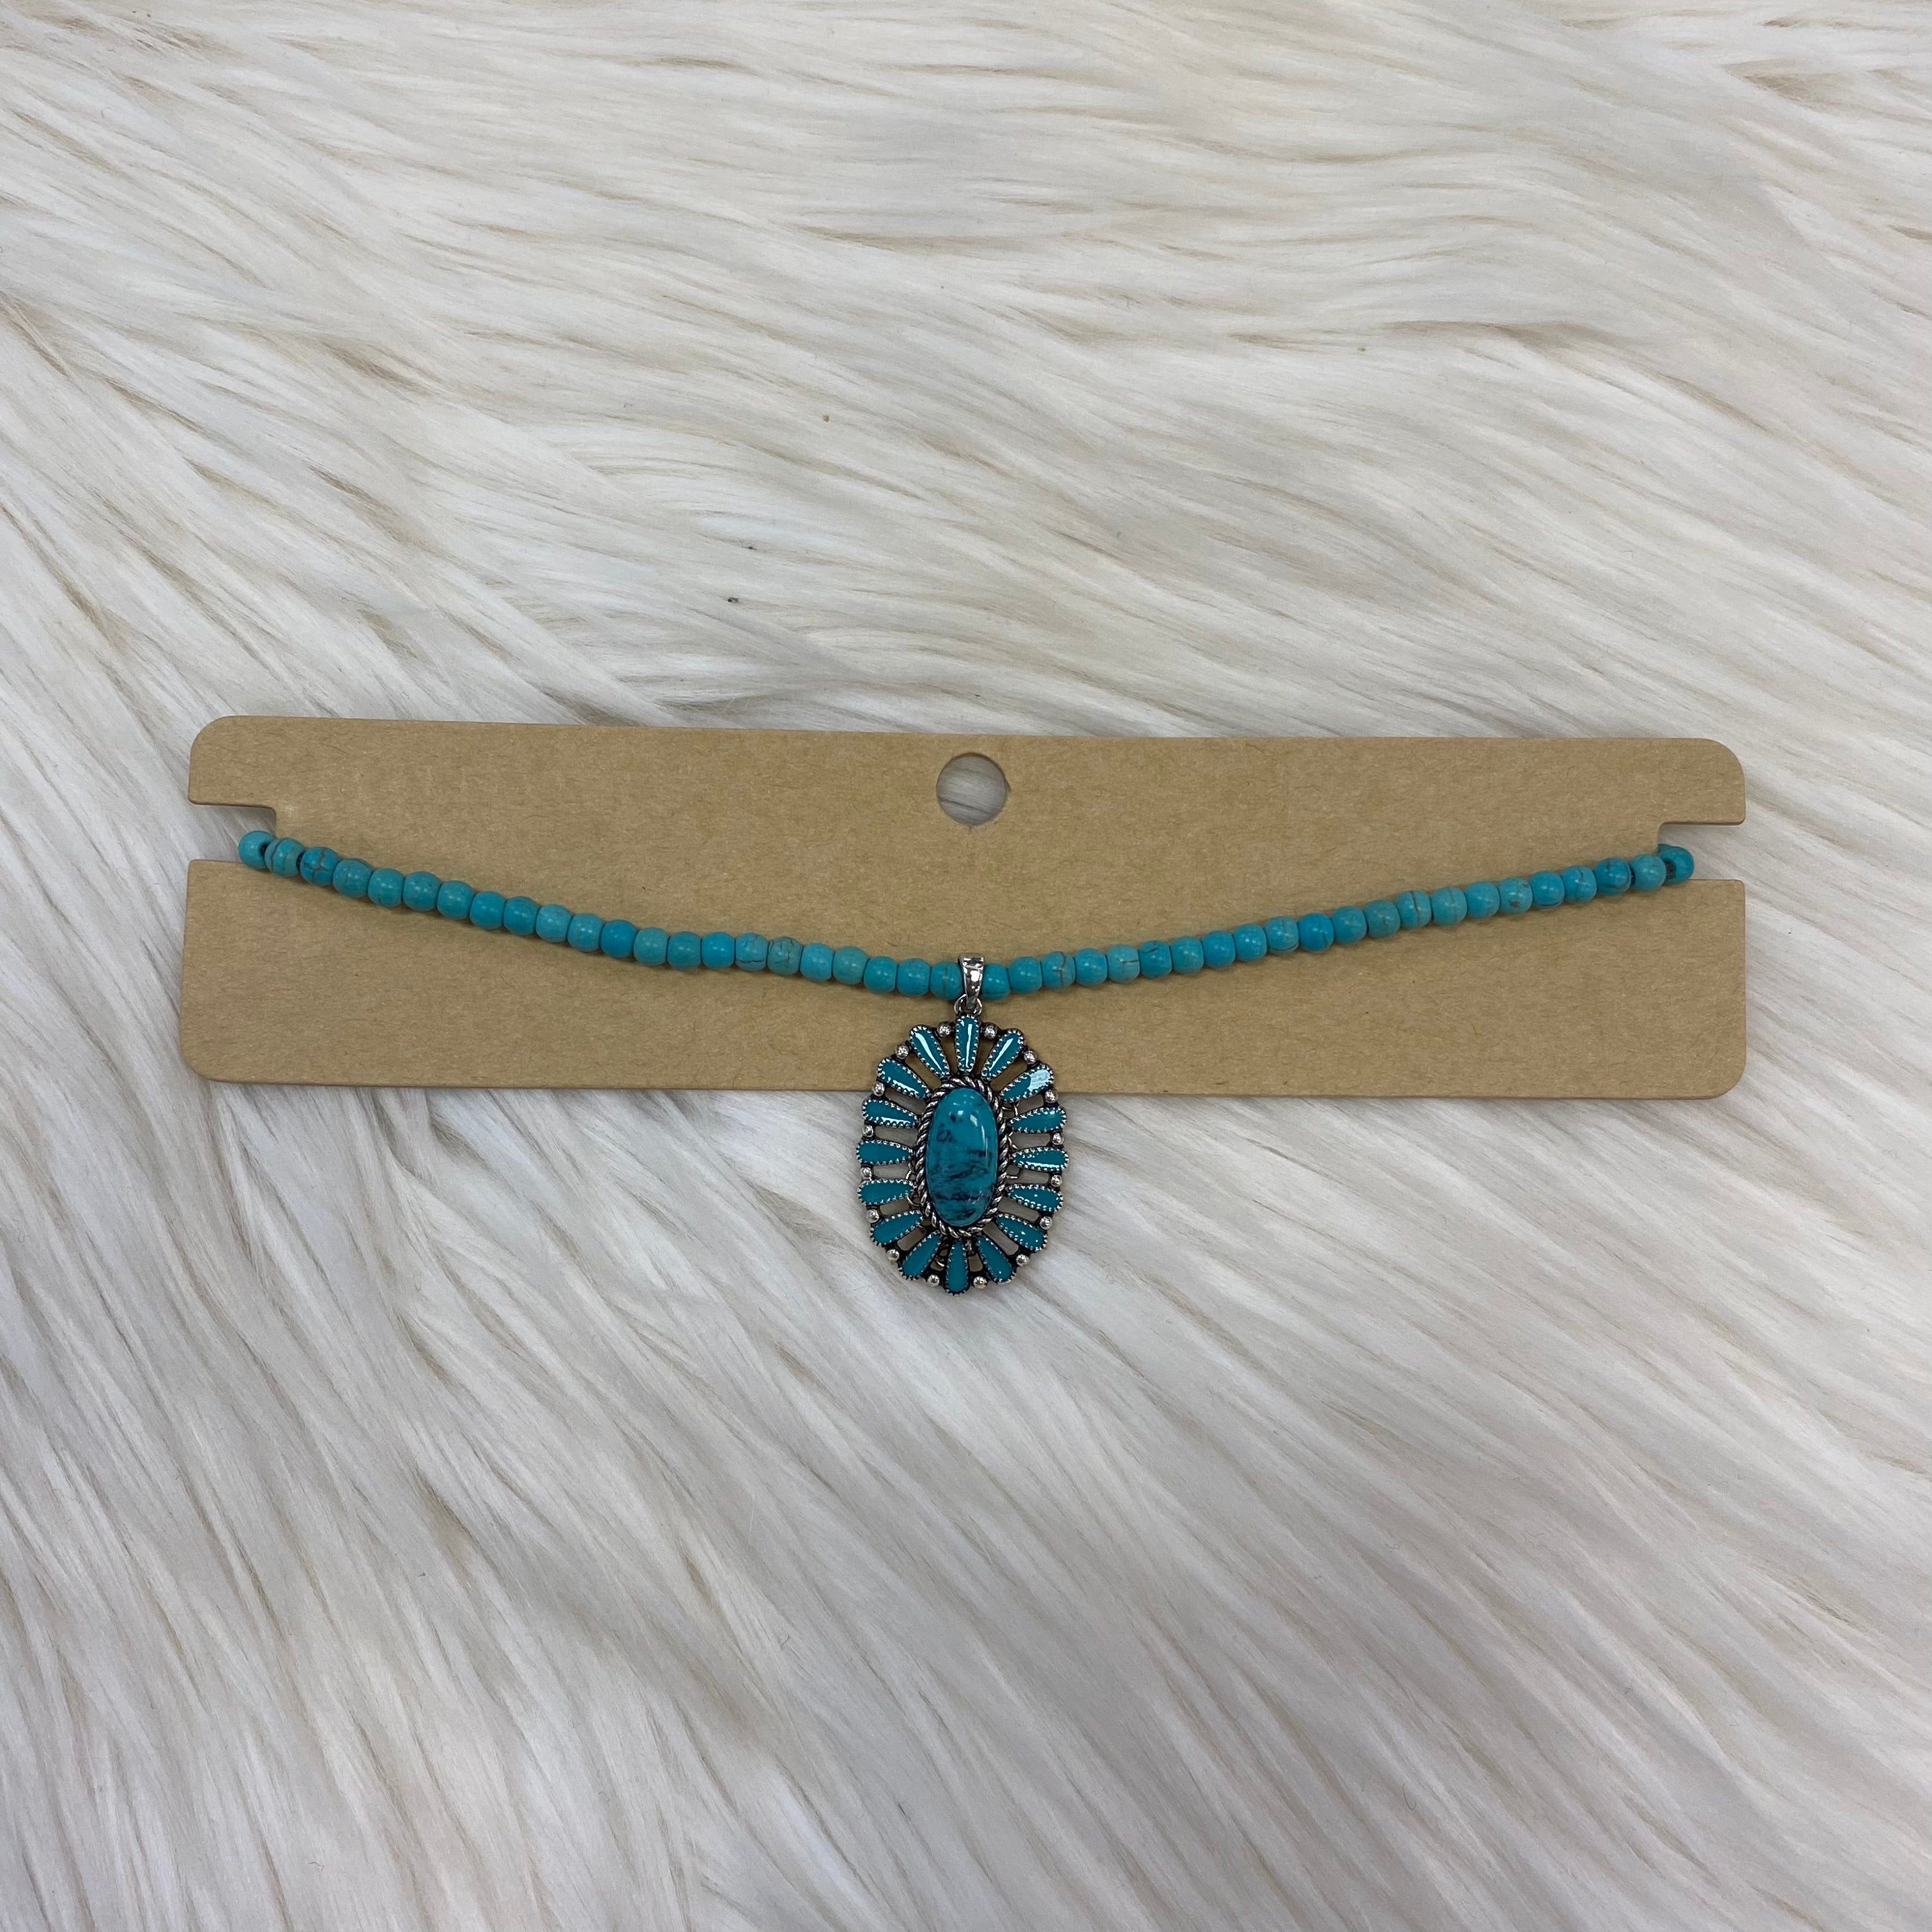 4mm Bead with Concho Pendant Turquoise Choker